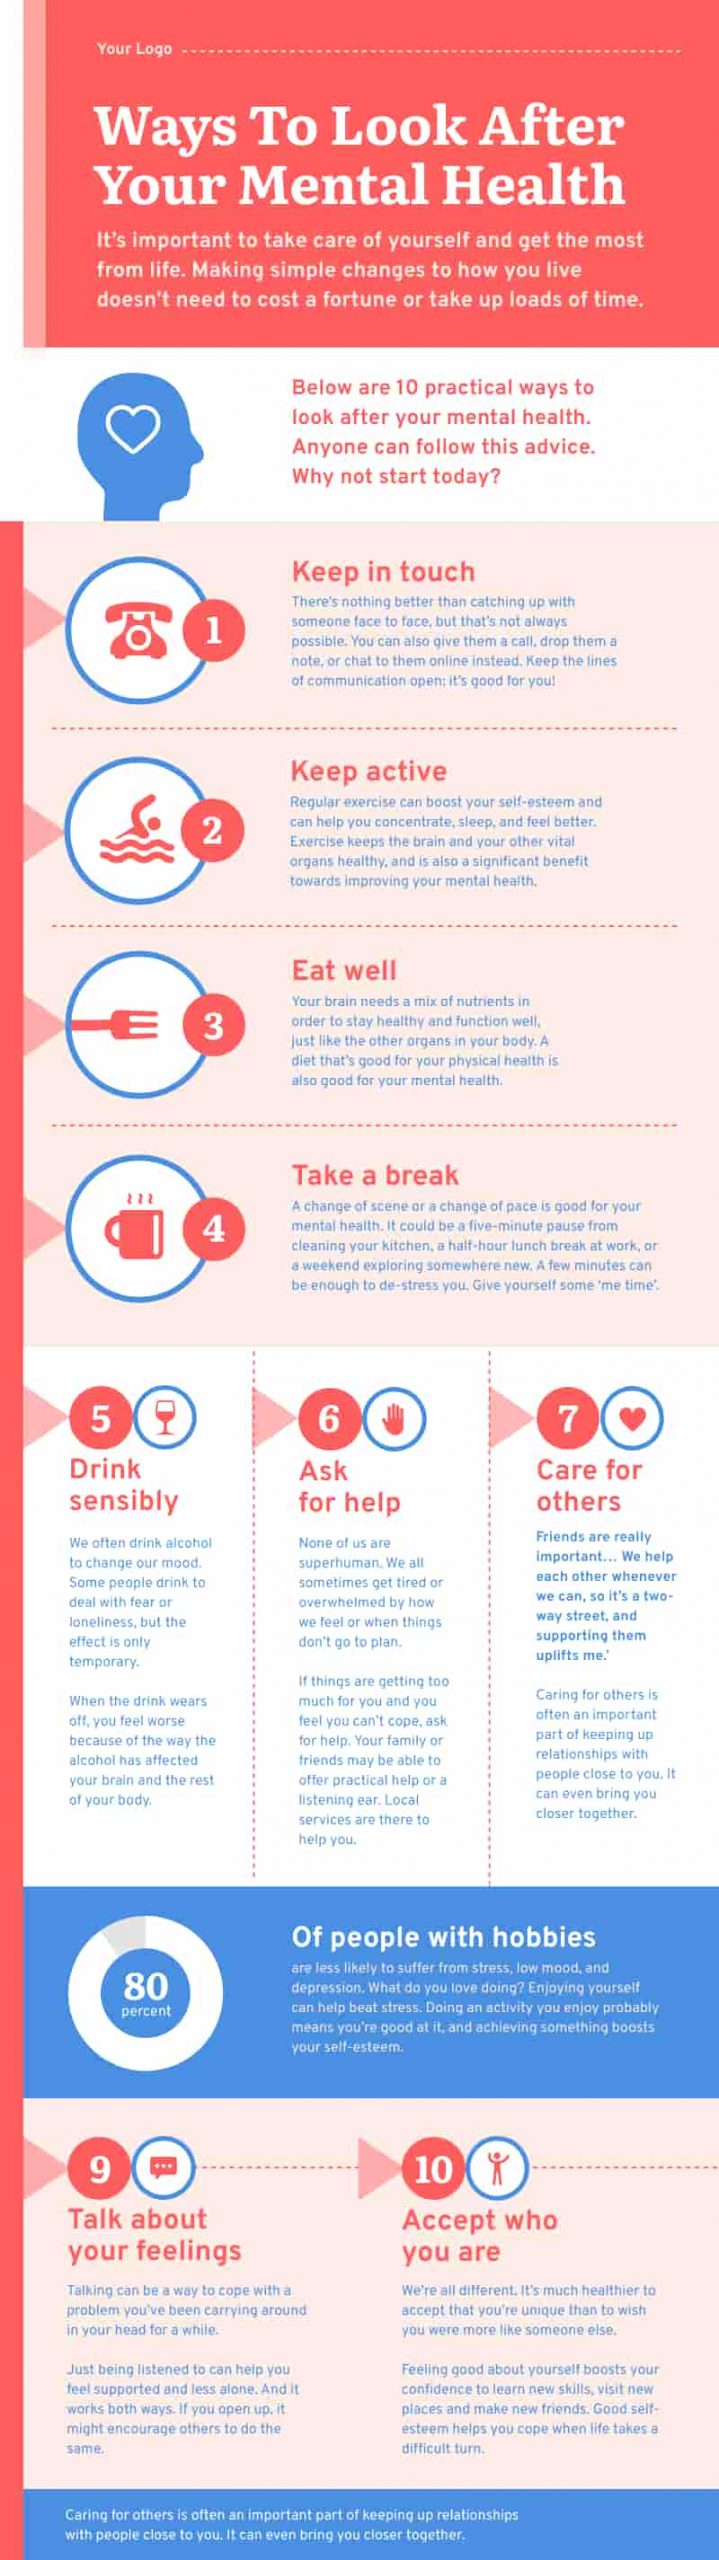 how to look after your mental health infographic template, mental health, mental health infographic, eating disorders